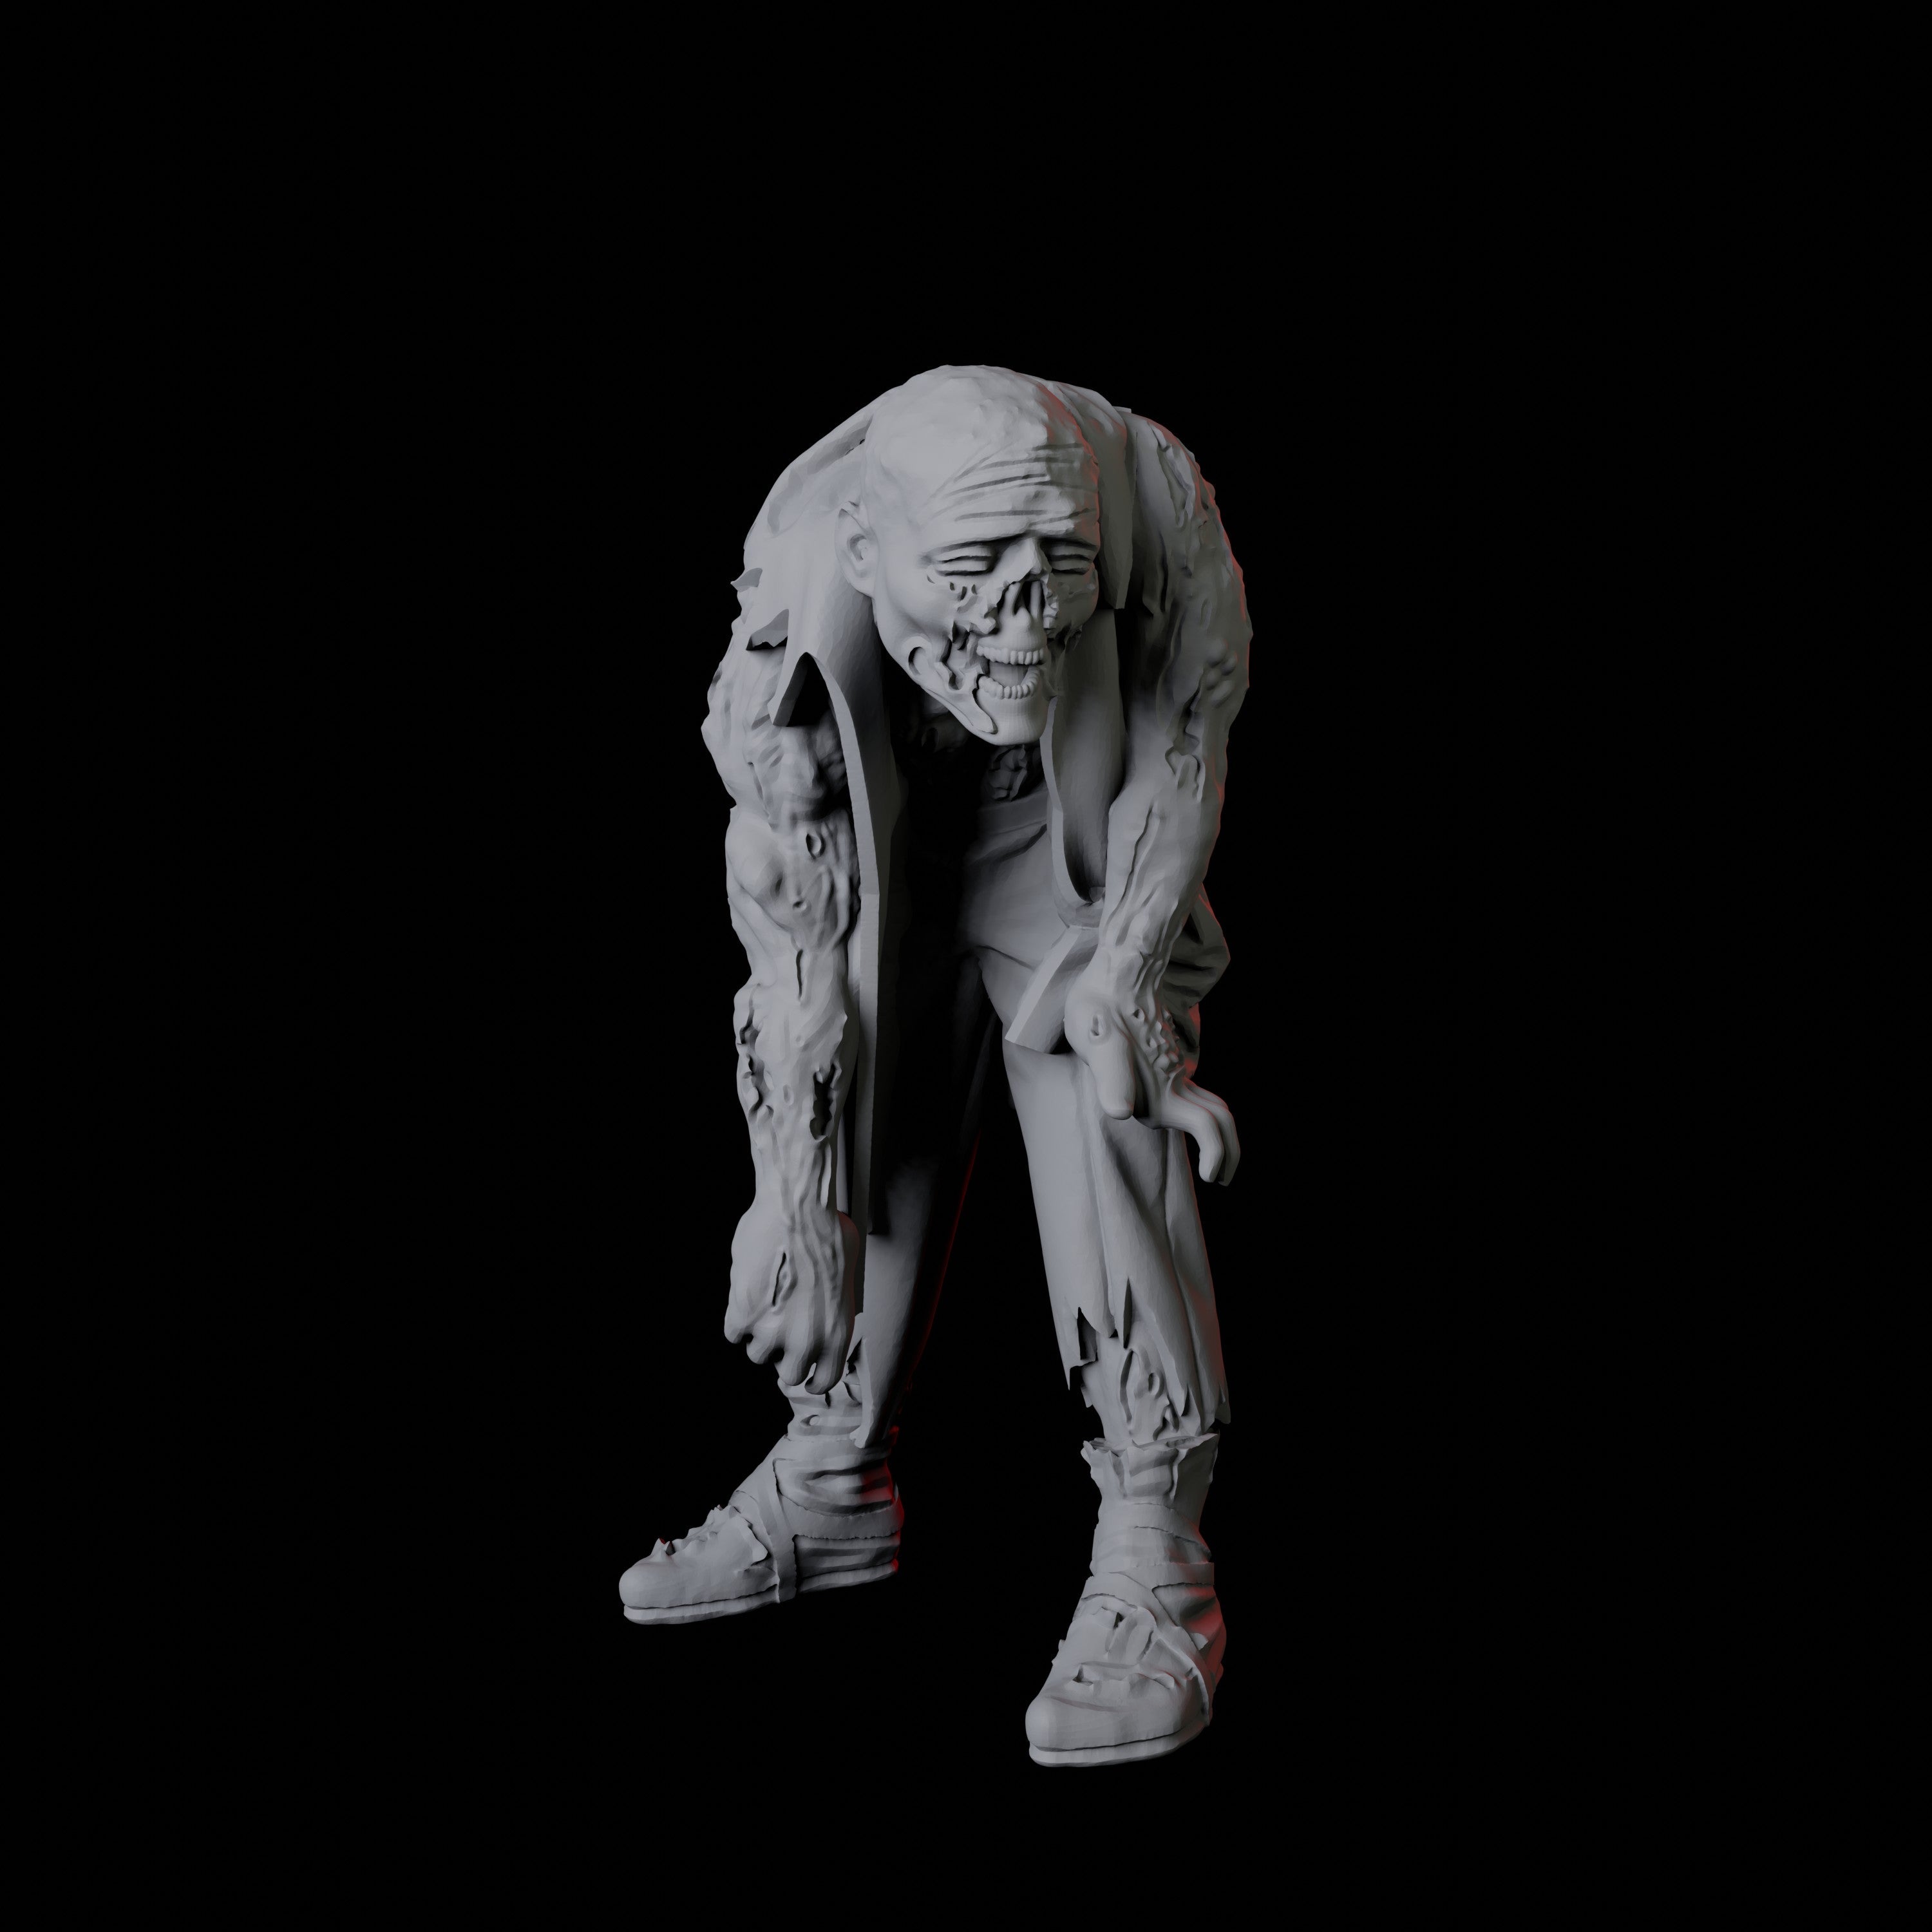 10 Zombie Miniatures for Dungeons and Dragons - Myth Forged